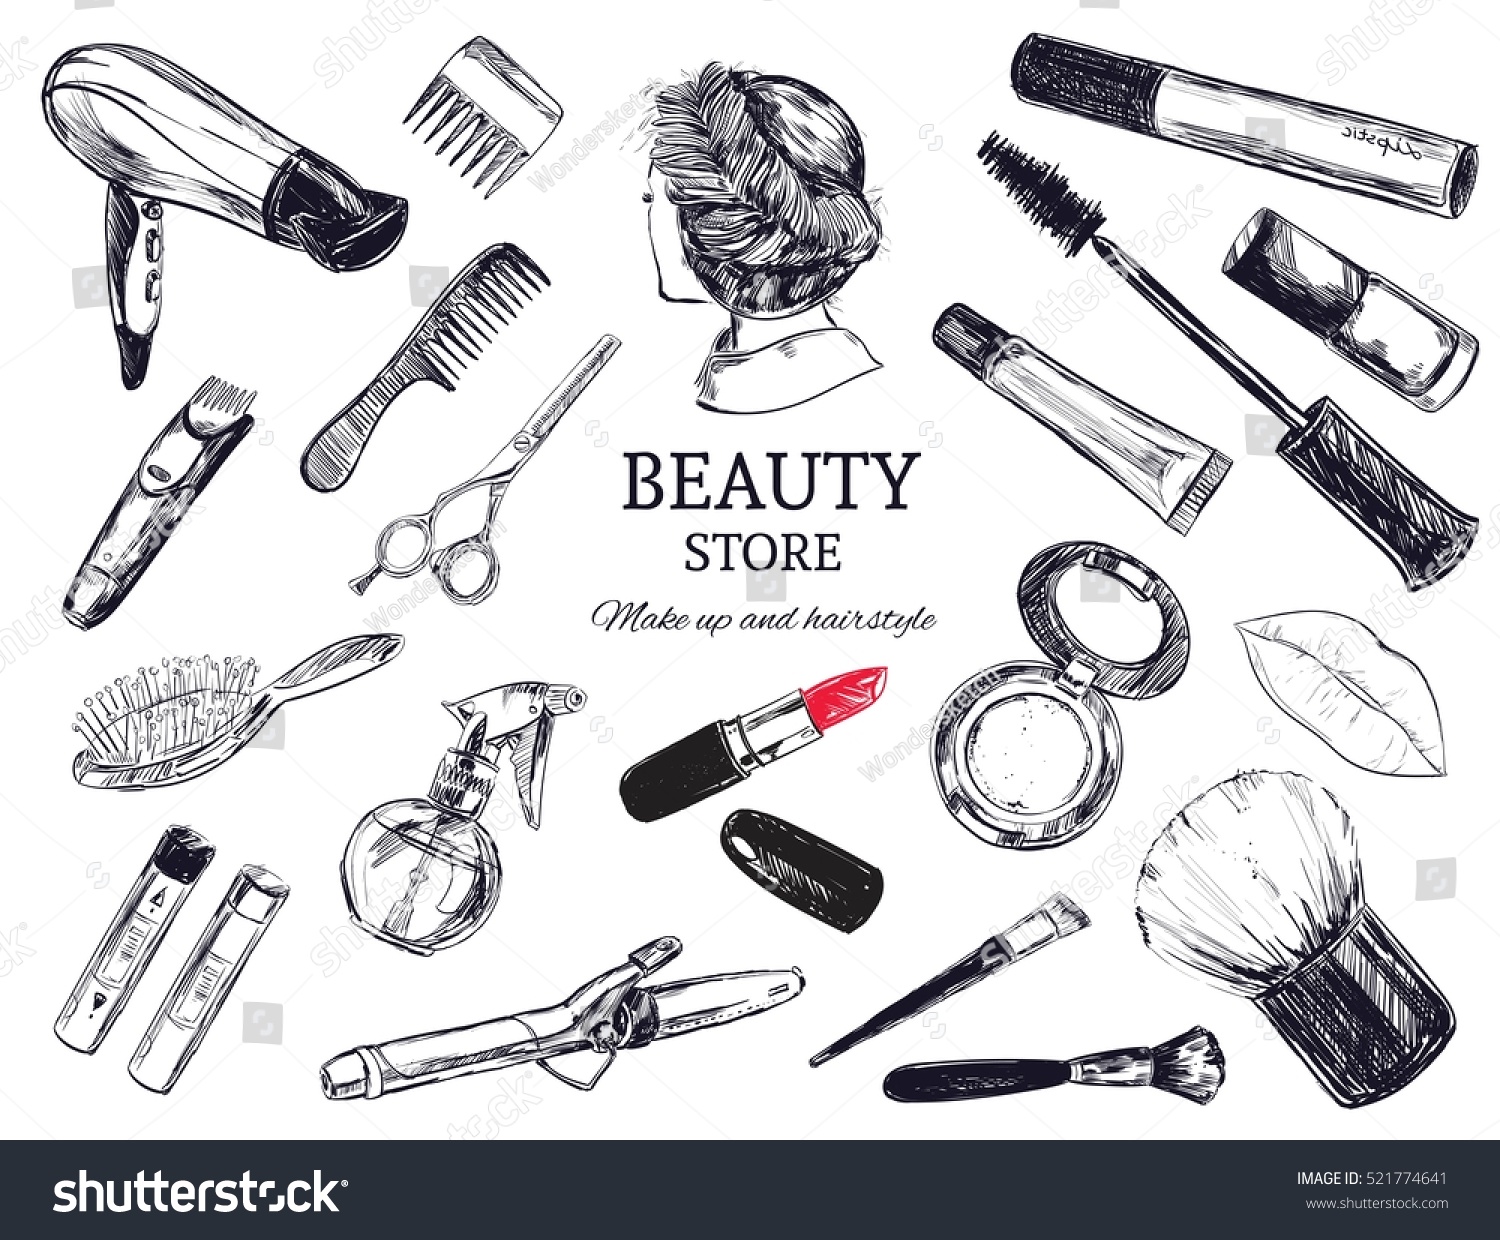 Beauty store background with make up artist and hairdressing objects: lipstick, cream, brush. Template Vector. Hand drawn isolated objects #521774641